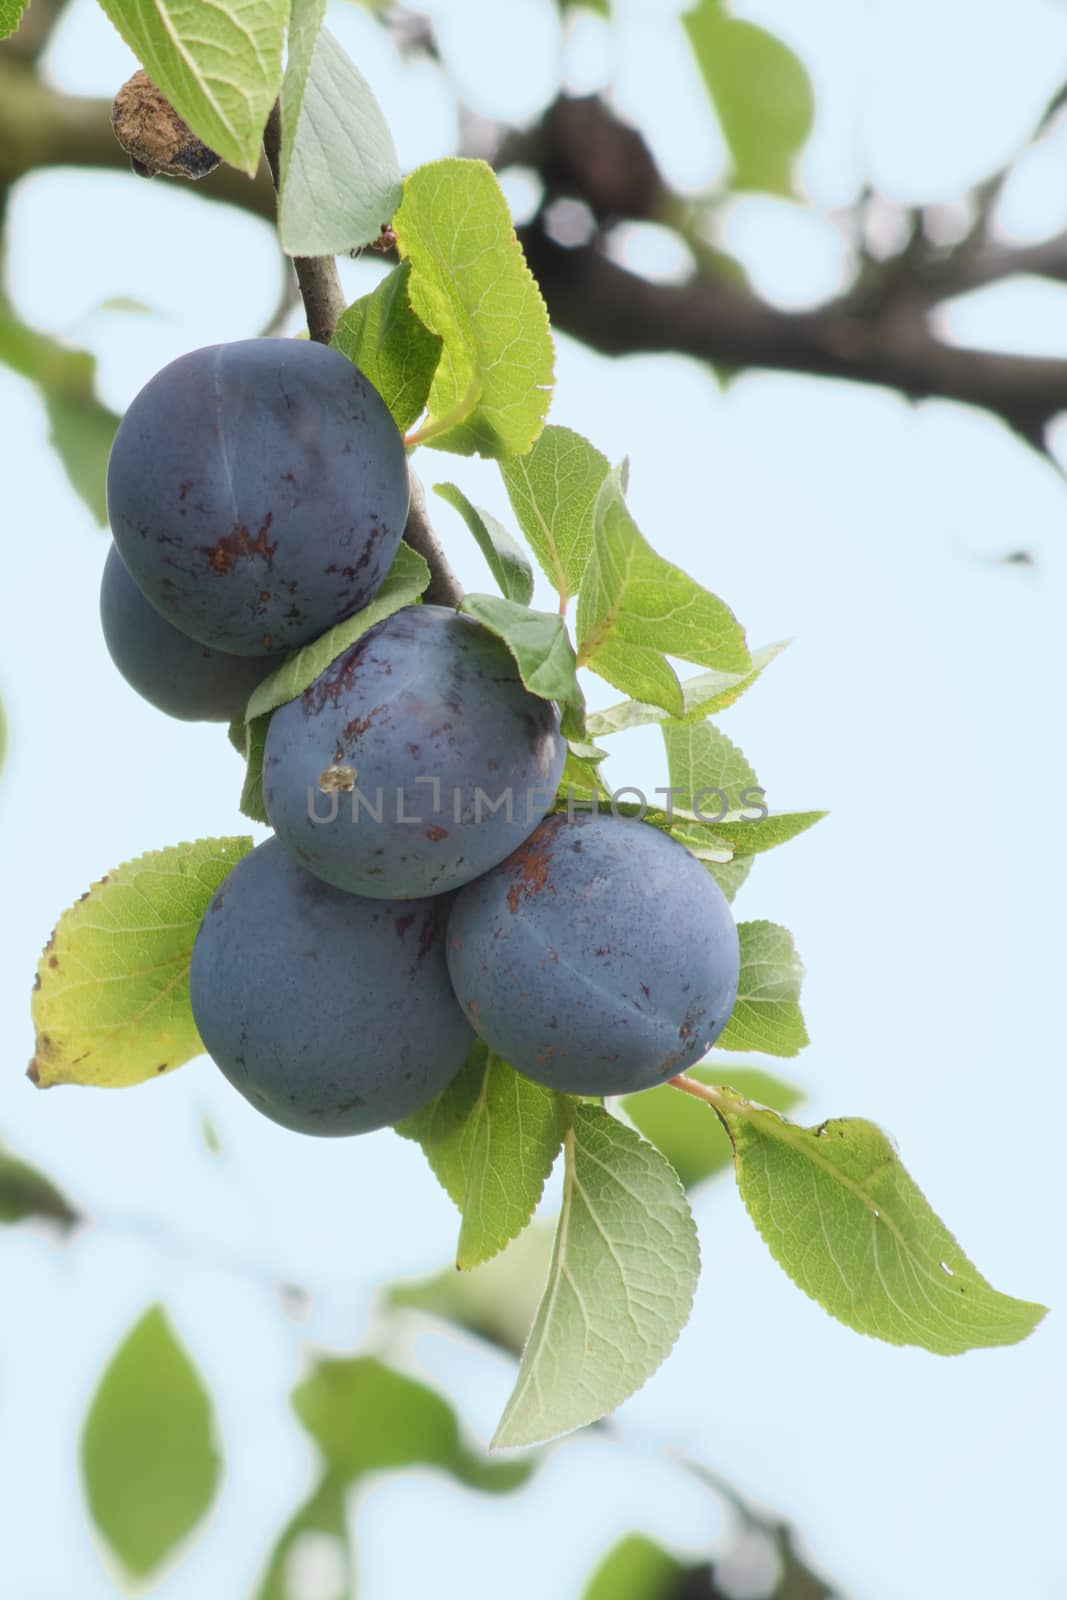 Five ripe plums on a branch.